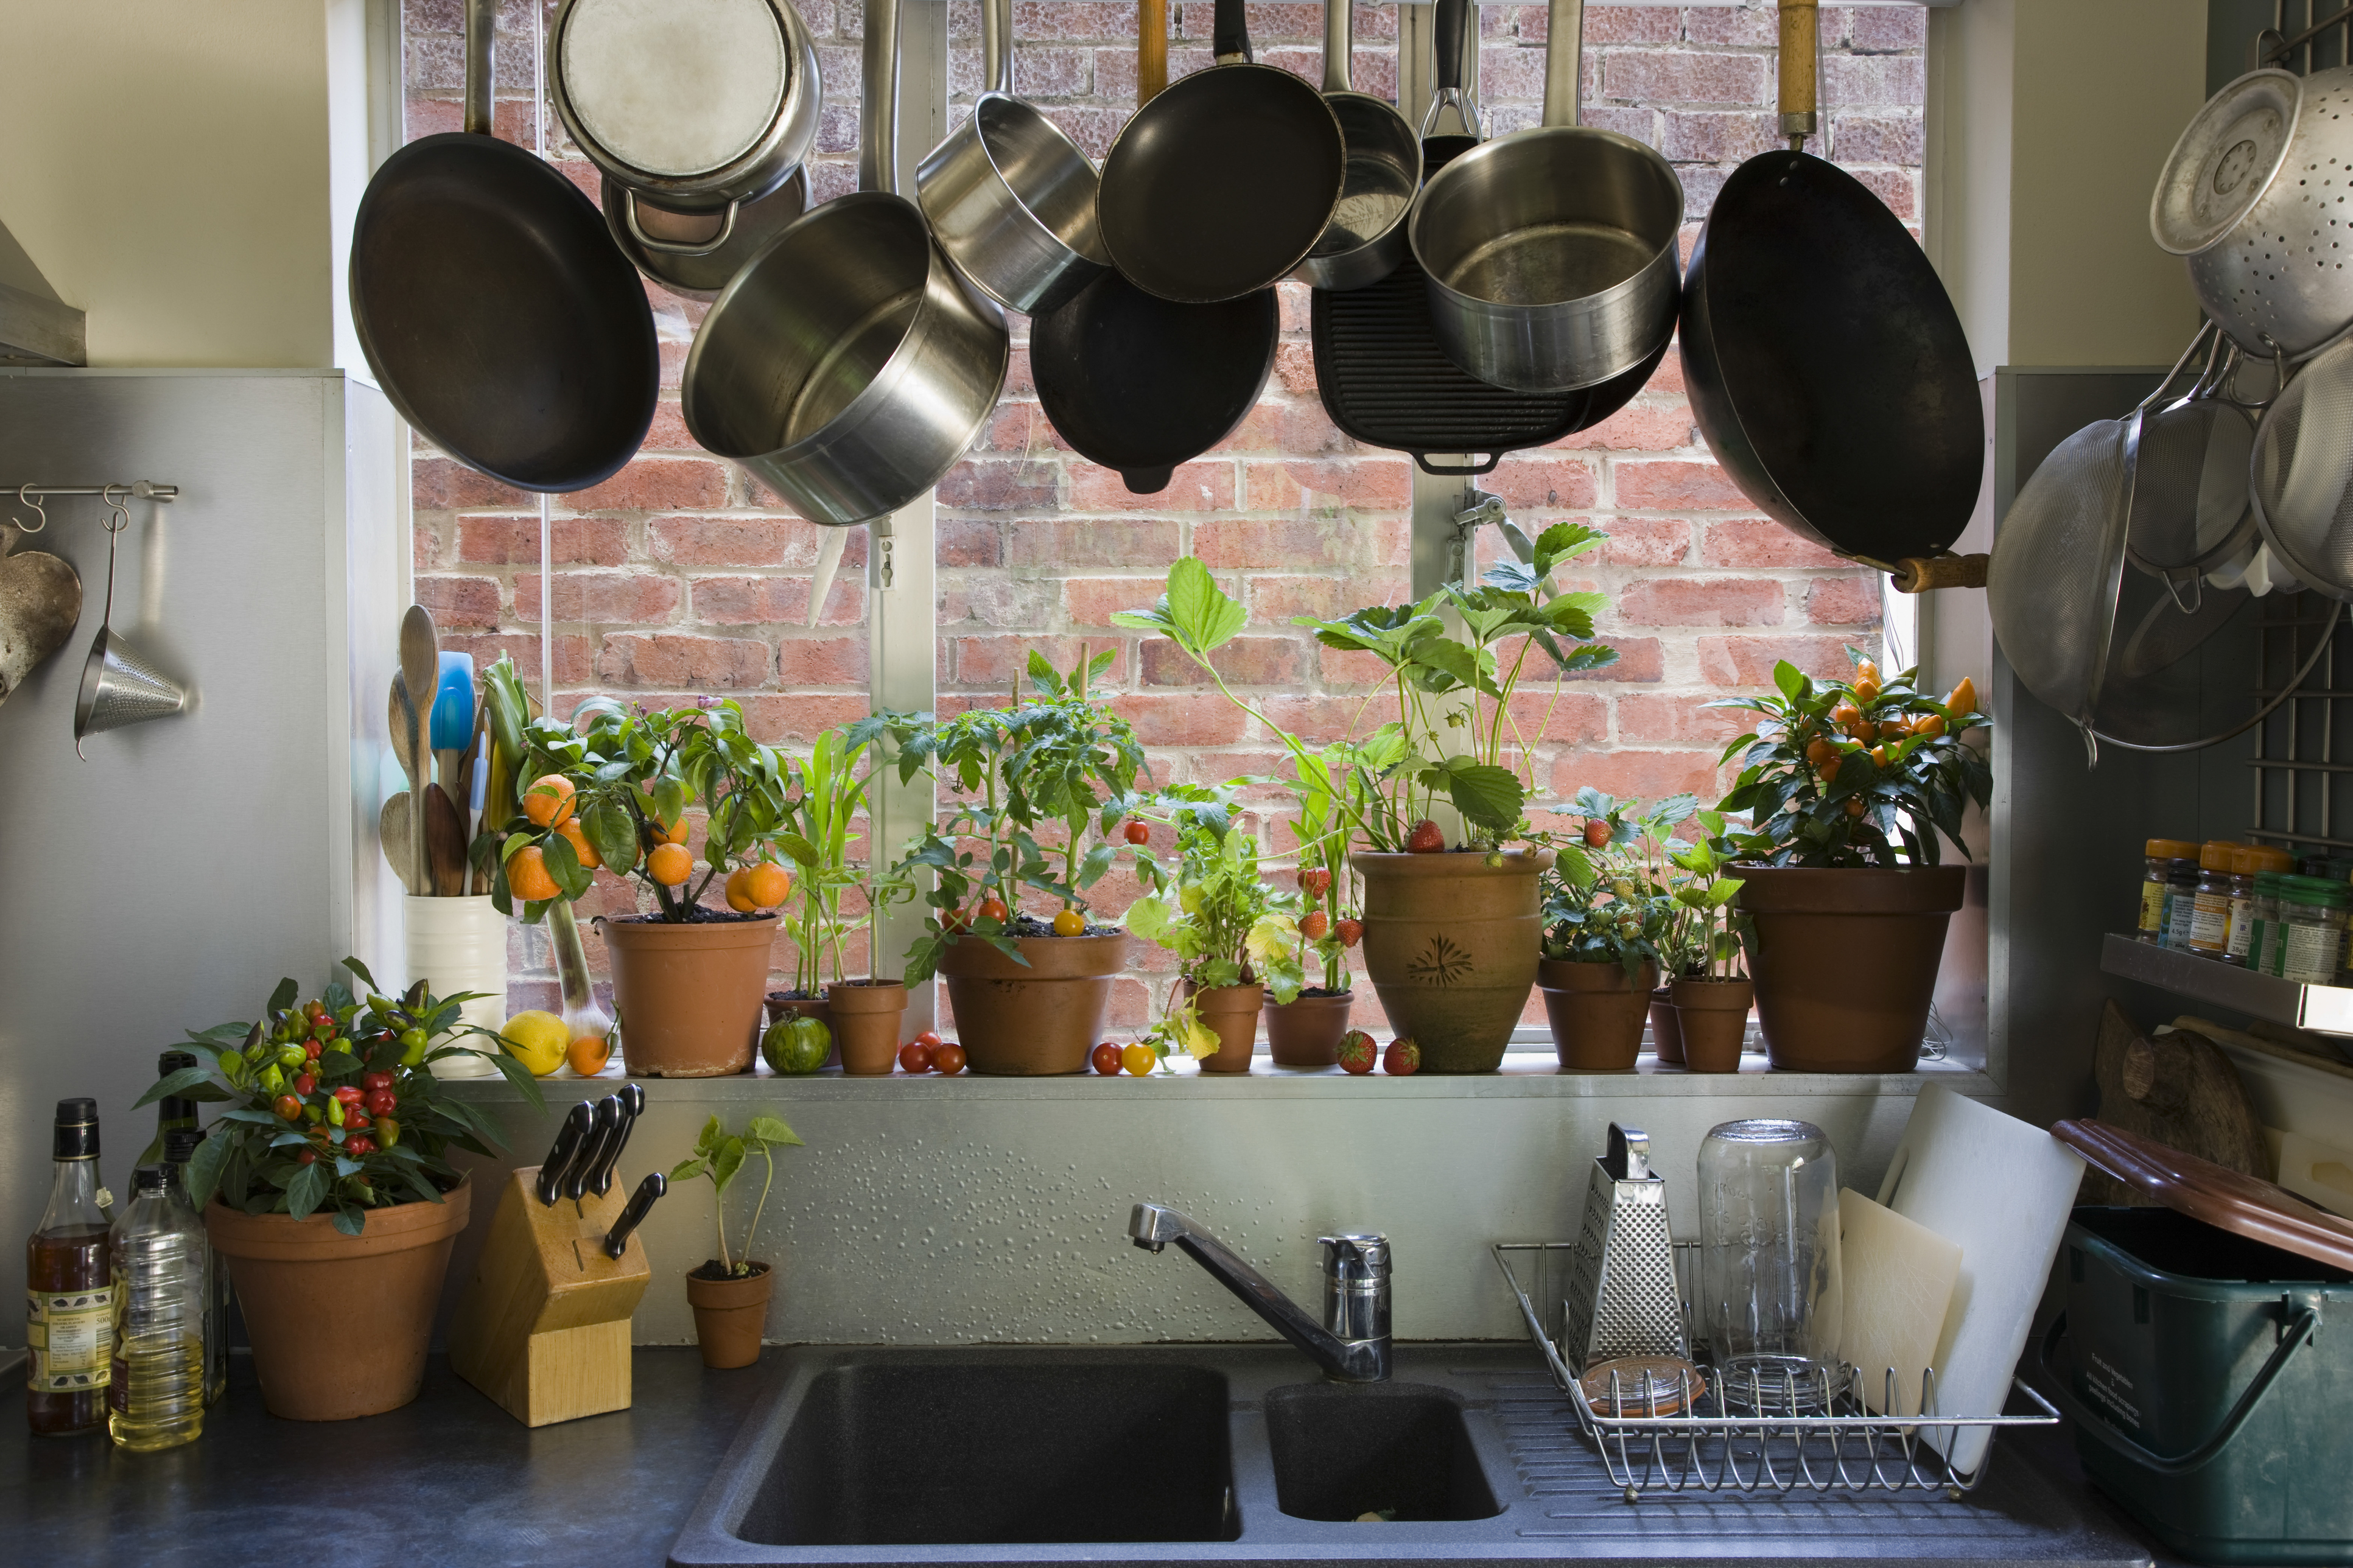 Houseplants can absorb nasty kitchen smells (Thinkstock/PA)